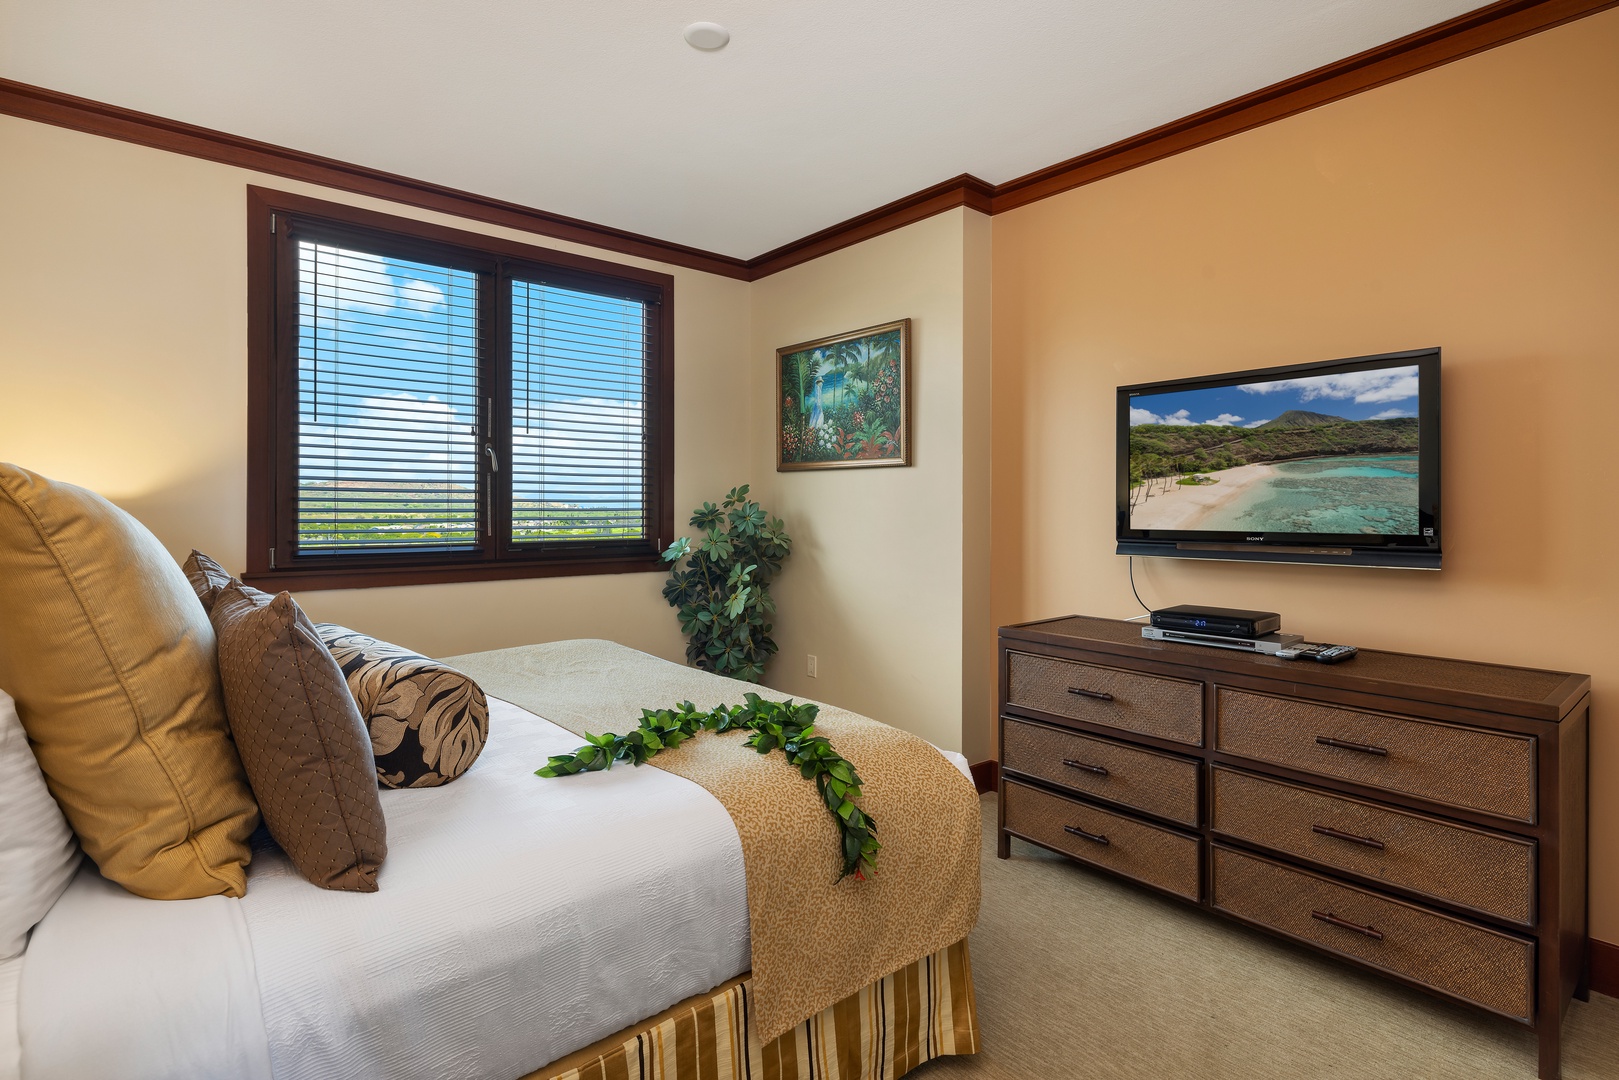 Kapolei Vacation Rentals, Ko Olina Beach Villas O1004 - The primary guest bedroom has a TV, natural lighting and plenty of storage.